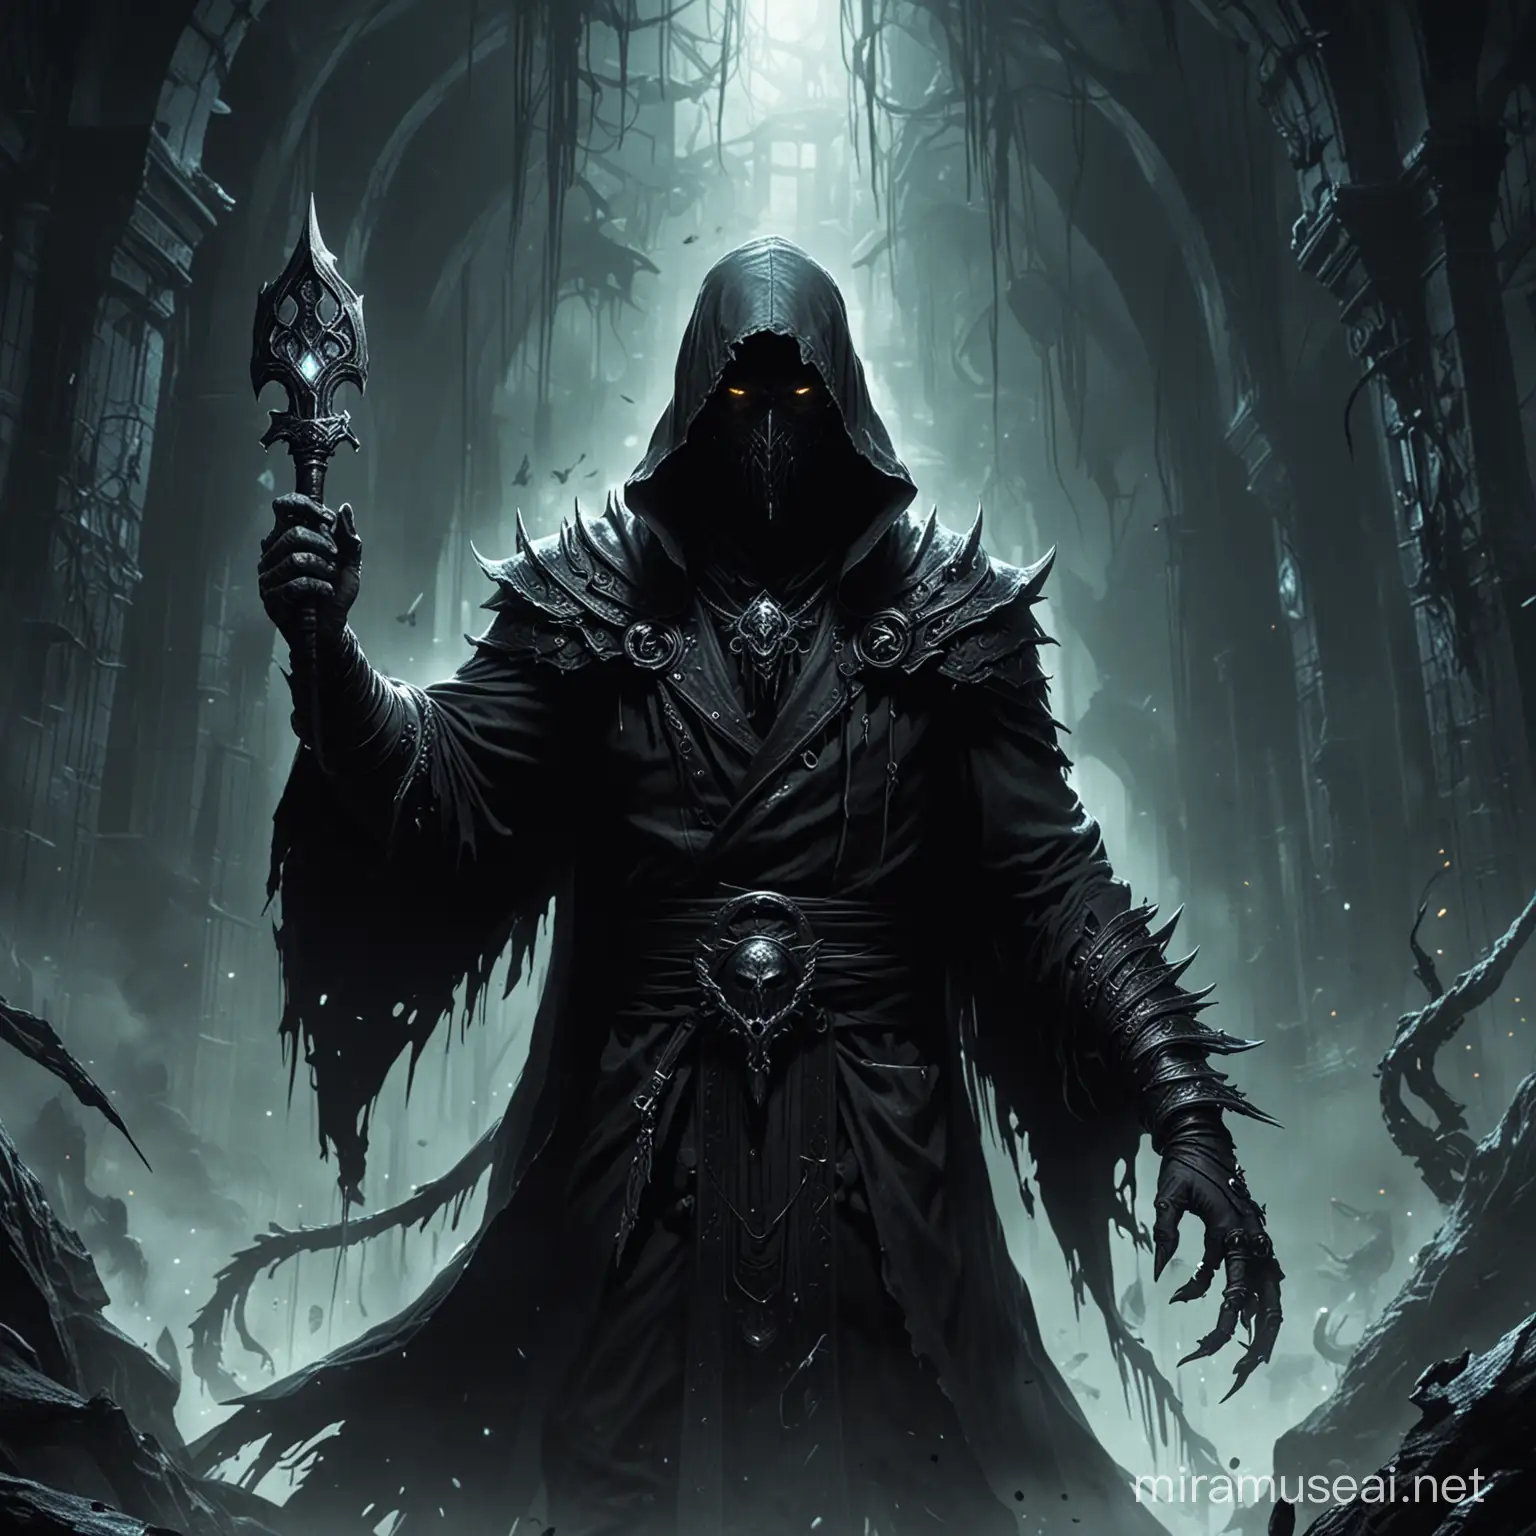 Fantasy roleplaying game. A great evil entity hiding in the Shadow realms. Frightening, dark, evil shades.